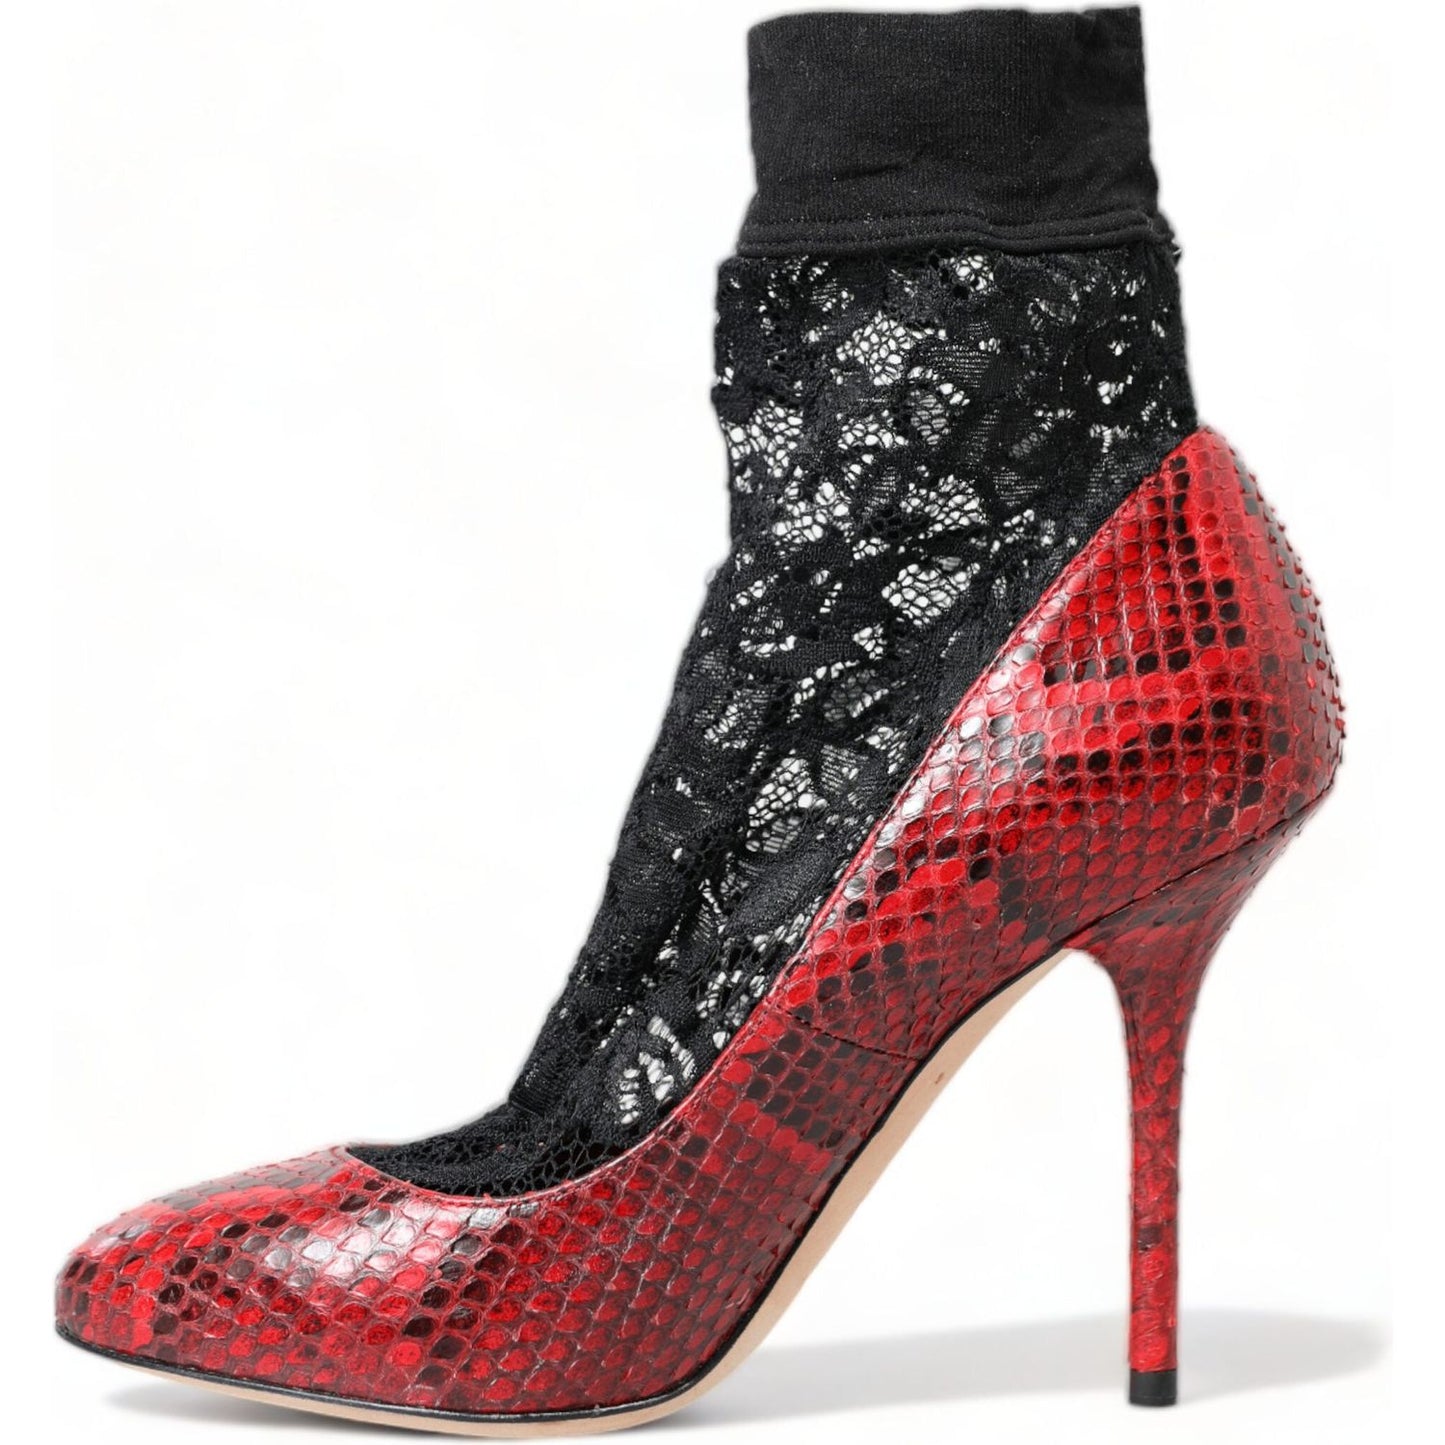 Dolce & Gabbana Red Almond Toe Snakeskin Pumps with Lace Socks red-ayers-leather-lace-socks-pumps-shoes